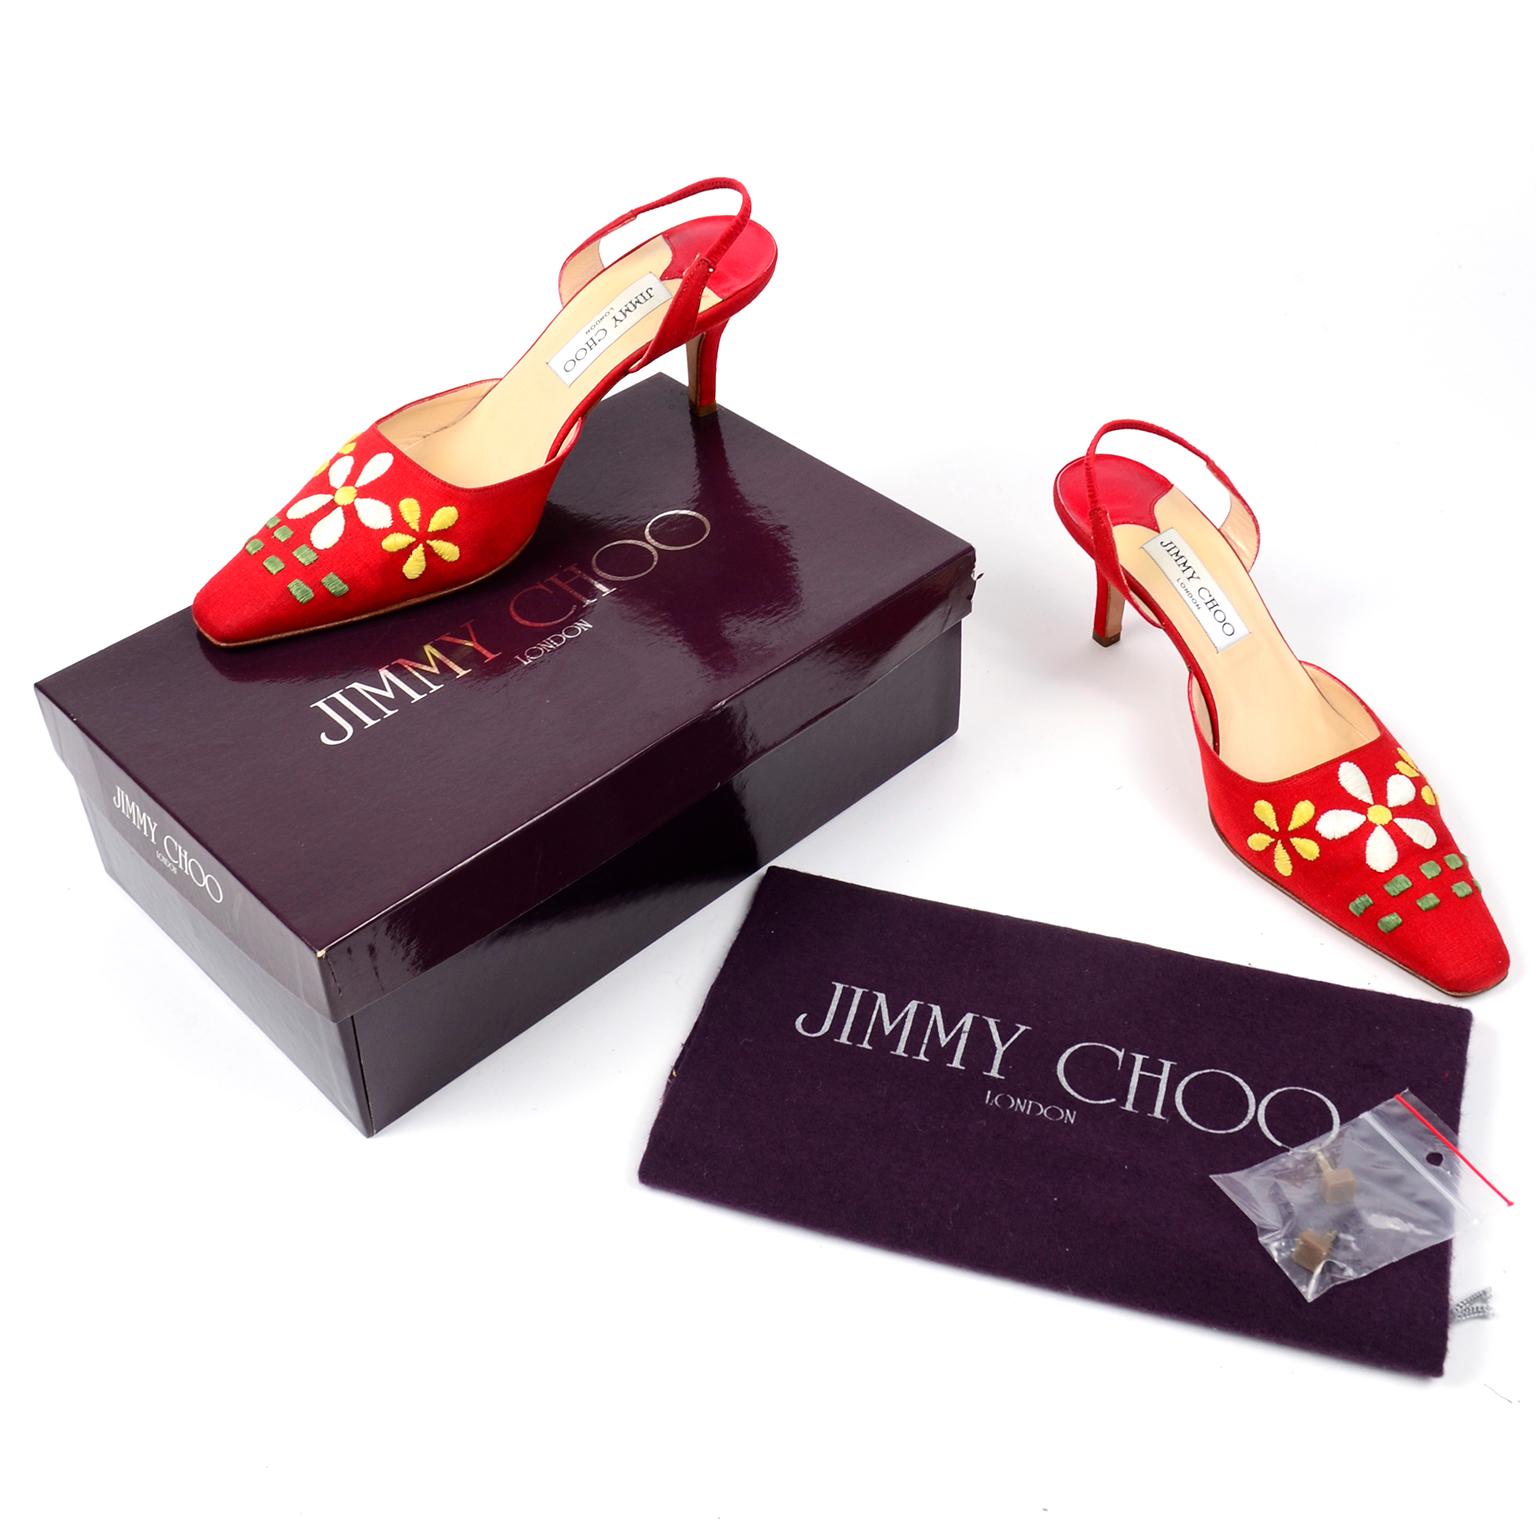 These are such fun Summer Jimmy Choo red linen slingback heel shoes with a slightly squared toe and large white and yellow daisies on the uppers. These shoes come with their original box, dust bag and extra heel tips. Marked size 37 and they fit on